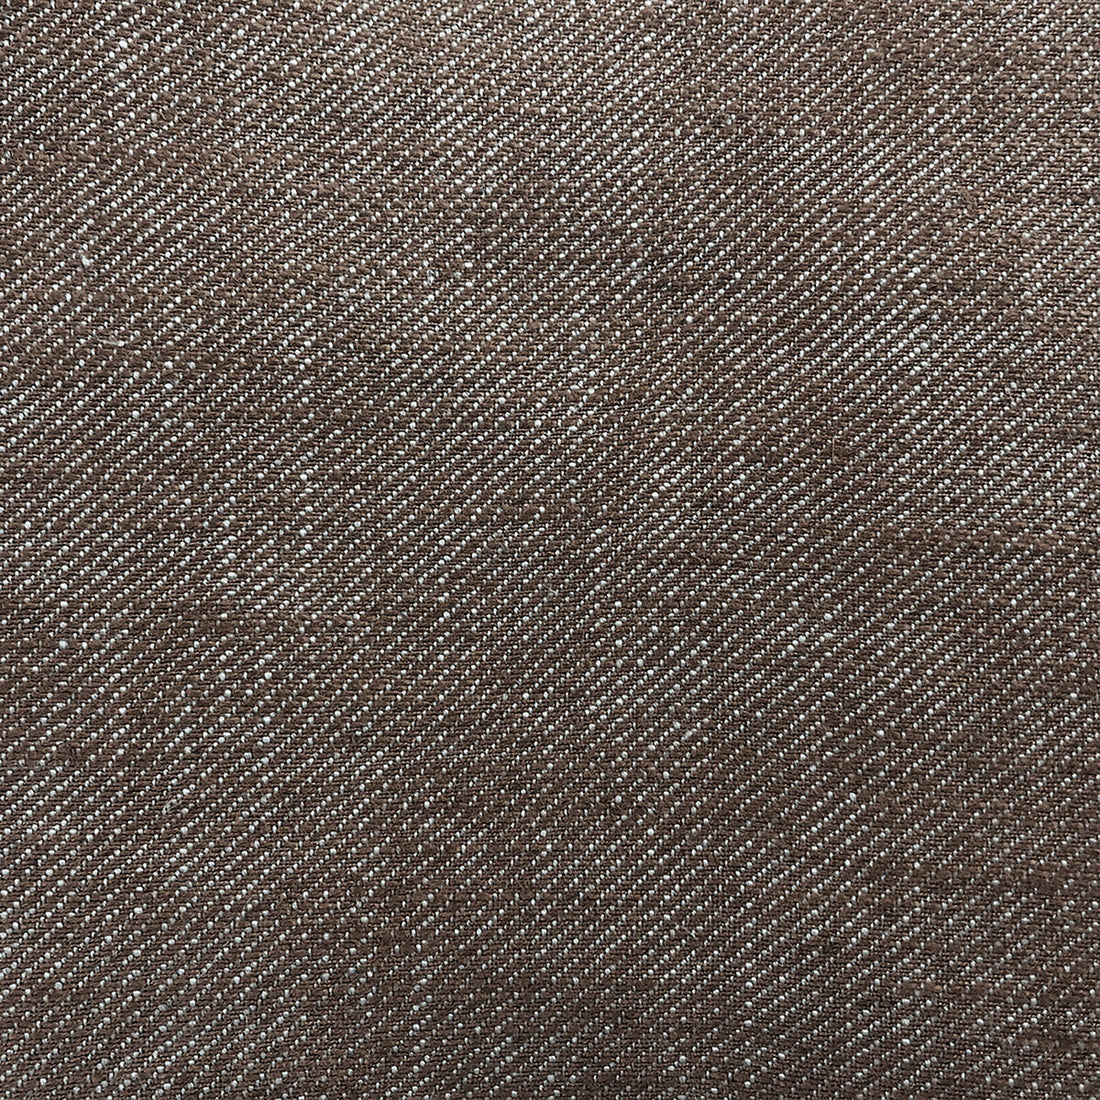 Hisa fabric in chocolate color - pattern GDT5639.005.0 - by Gaston y Daniela in the Gaston Japon collection